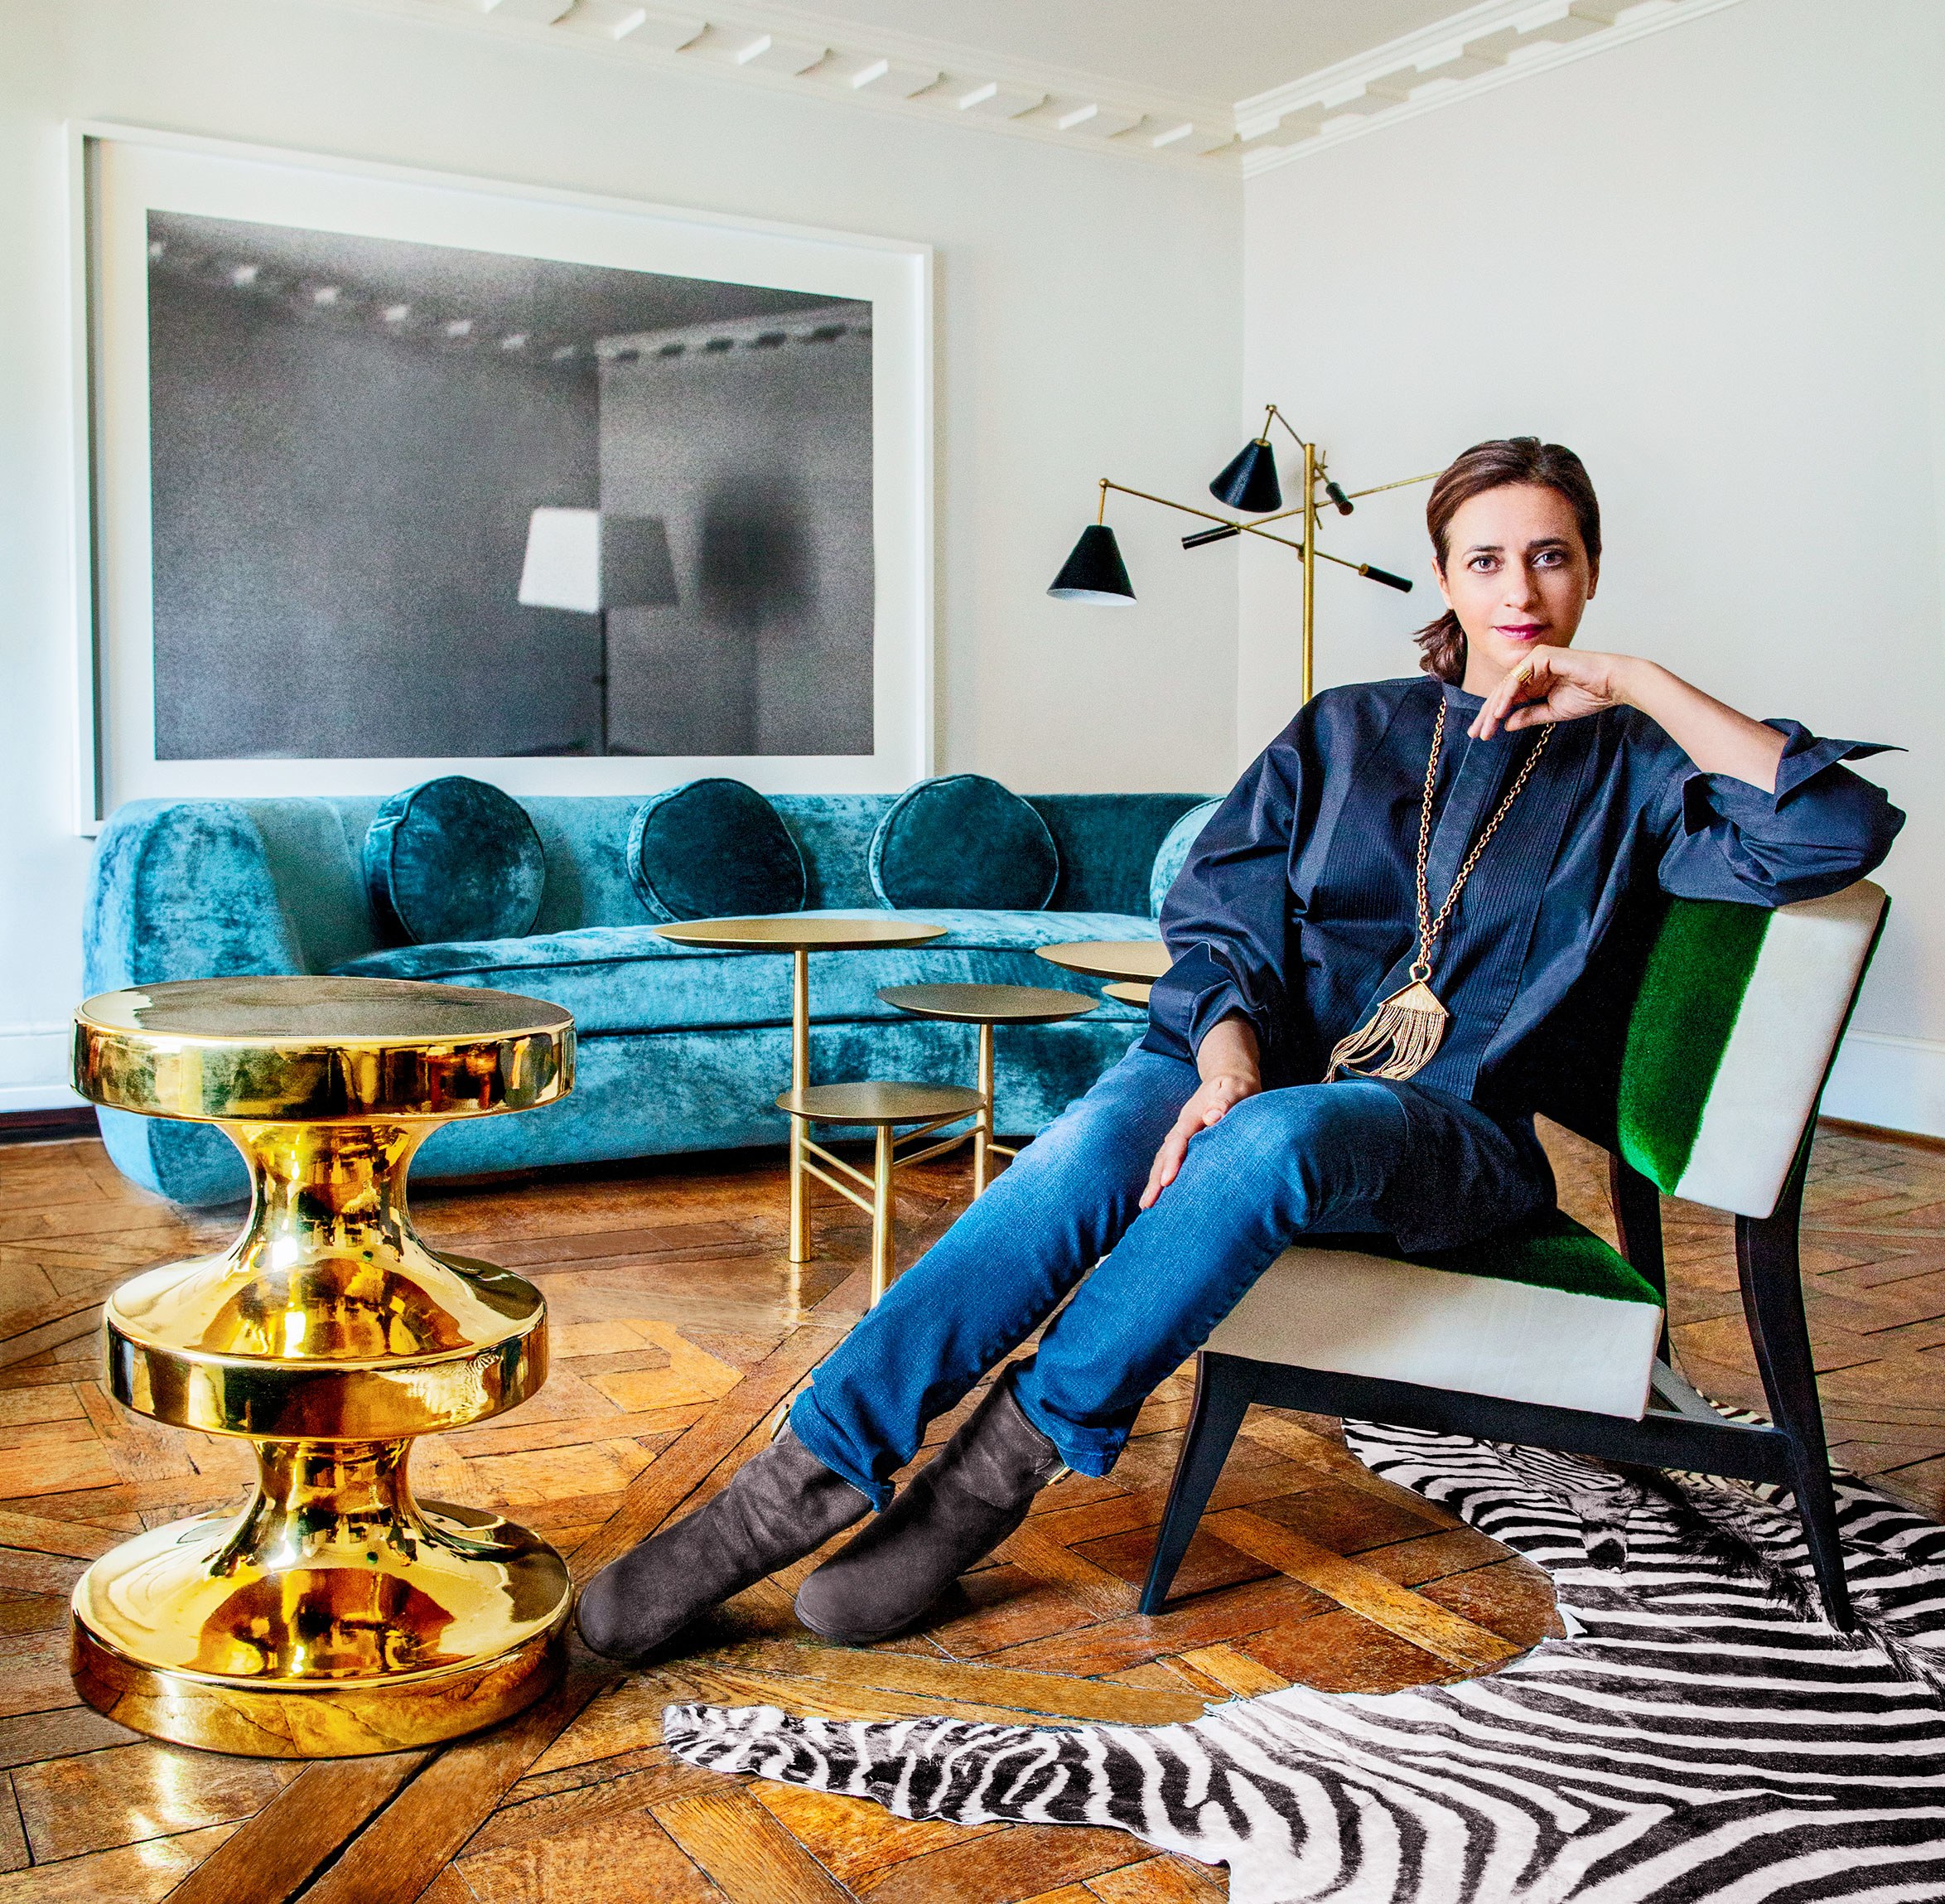 10 Inspiring Women Who Happen to Be the Best Interior Designers Ever_1 best interior designers 10 Inspiring Women Who Happen to Be the Best Interior Designers Ever 10 Inspiring Women Who Happen to Be the Best Interior Designers Ever 9